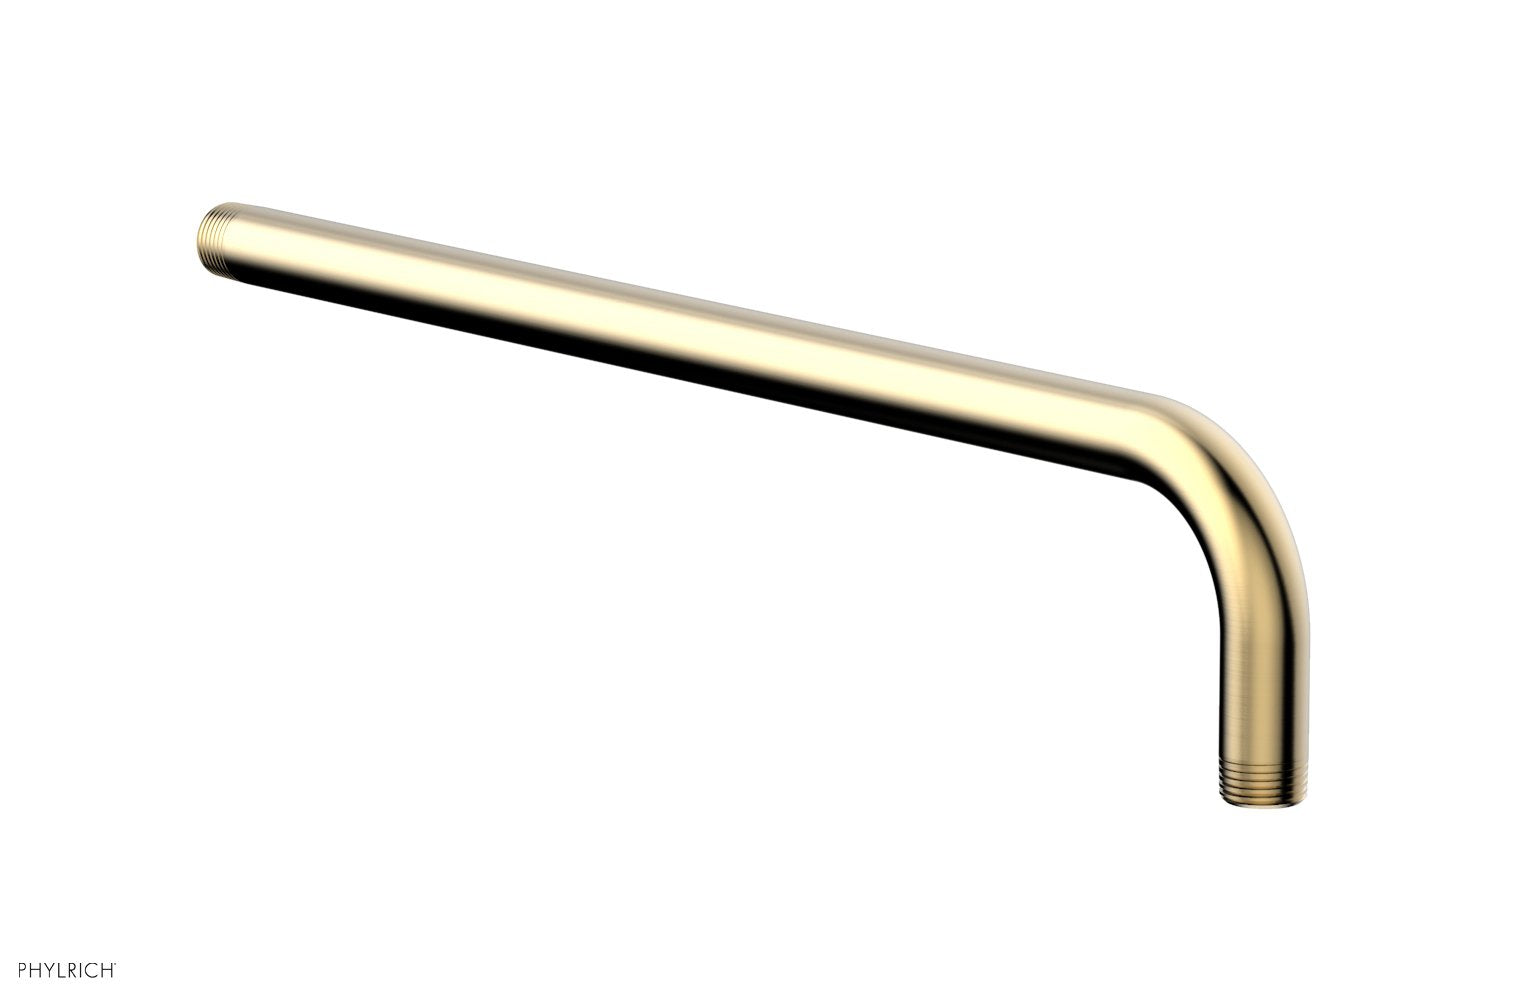 Phylrich 90° Angle 16" Shower Arm